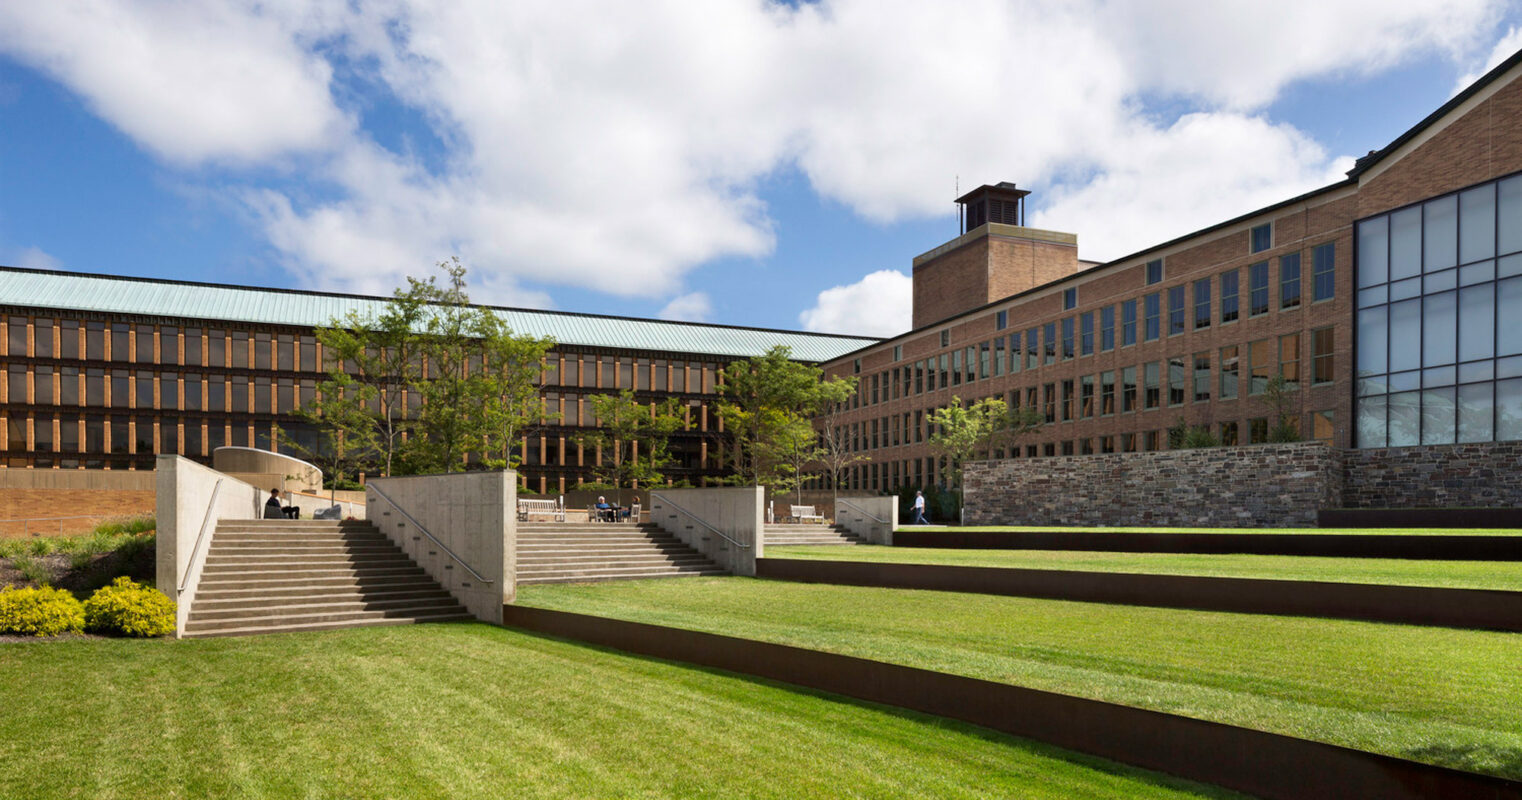 Broad lawn flanked by tiered landscaped areas in front of an expansive modern brick building with large glass windows, featuring outdoor seating and pedestrians.